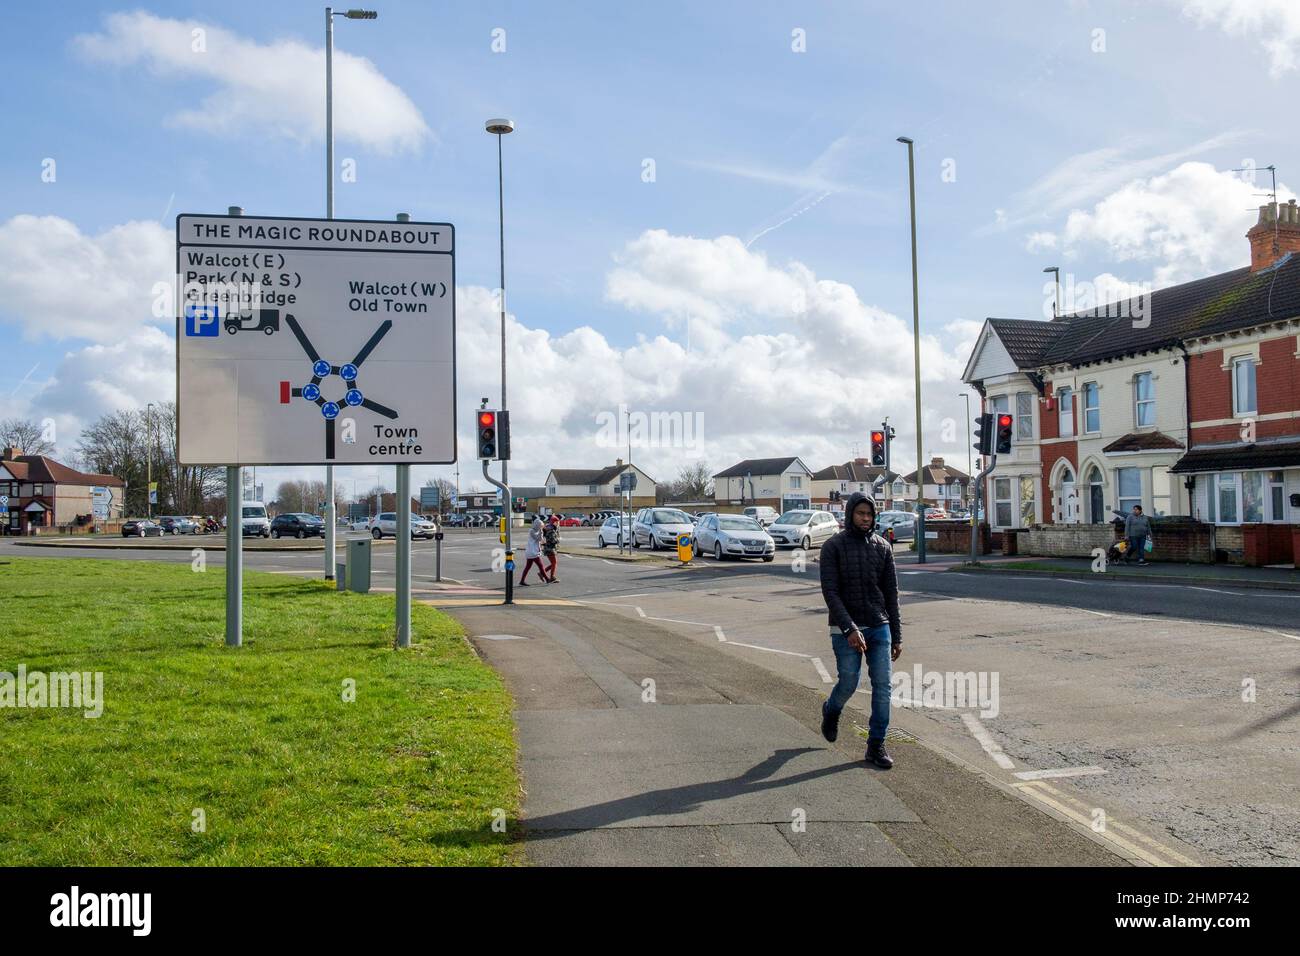 Swindon, Wiltshire, UK. 19th February, 2019. Cars are pictured driving around Swindon's famous landmark 'the magic roundabout'. Stock Photo